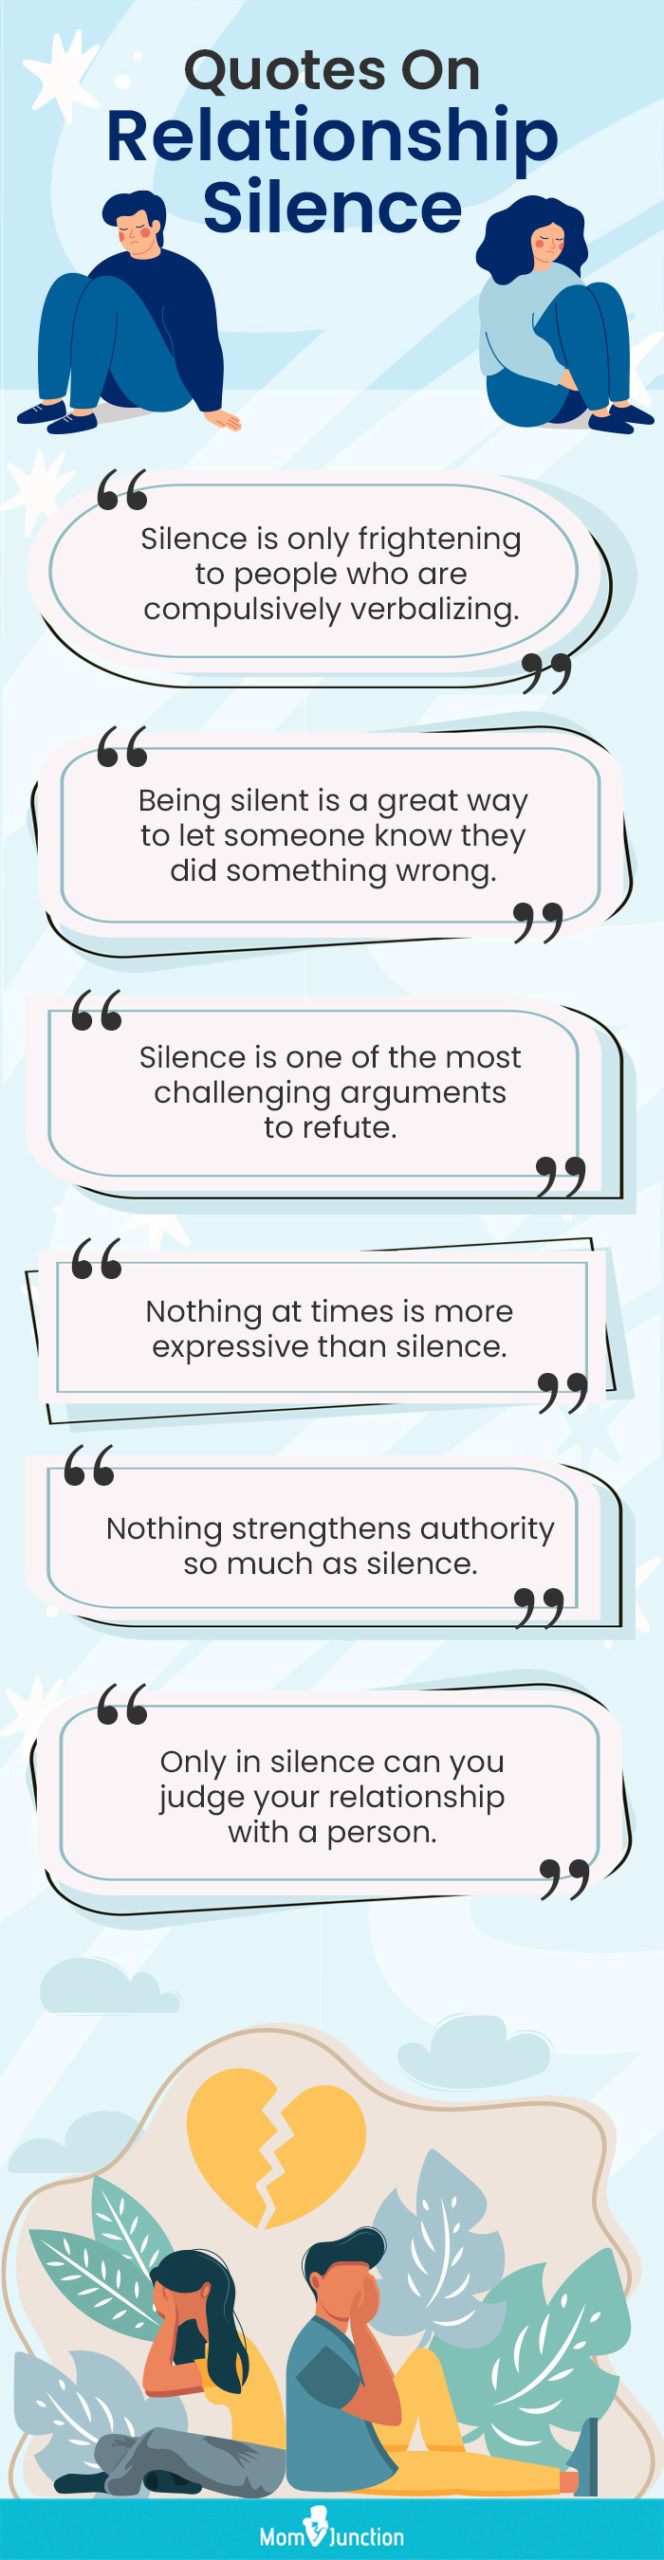 quotes on relationship silence (infographic)